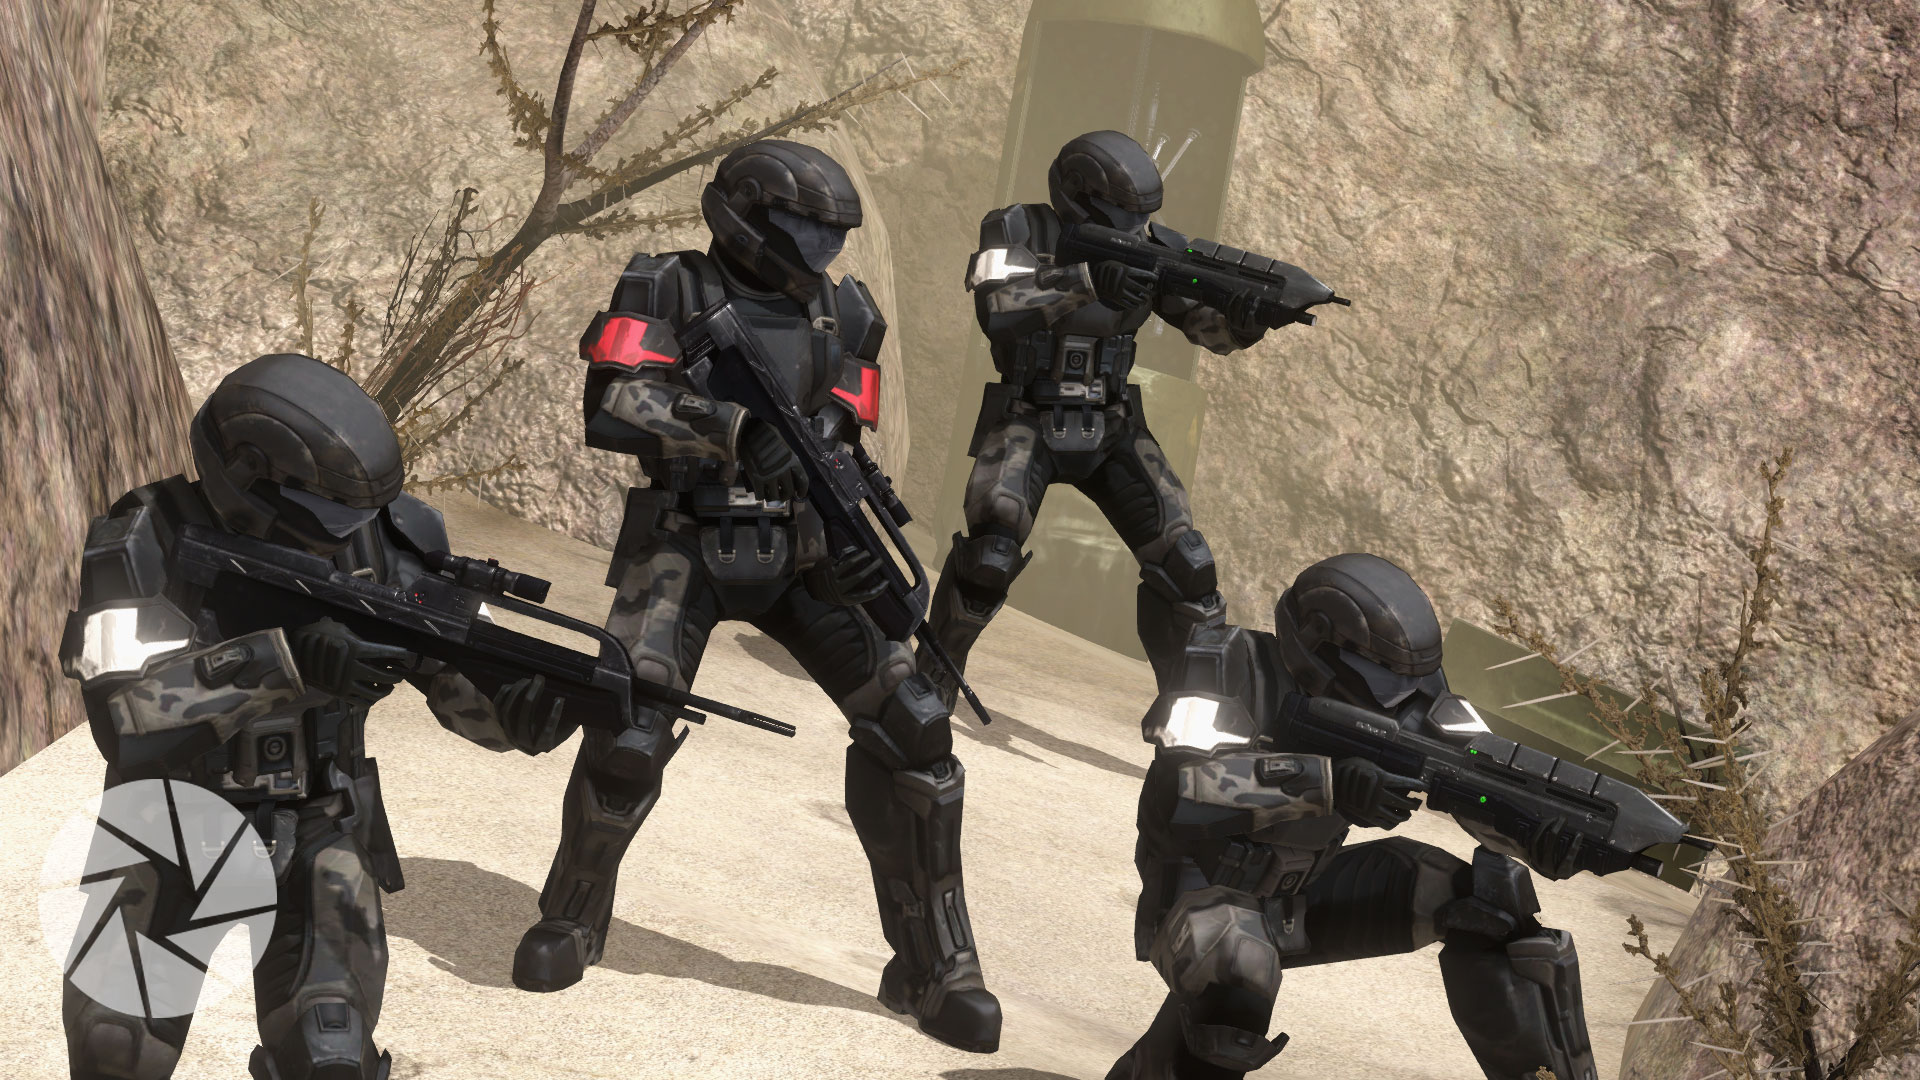 www.halowaypoint.com. odst factions universe halo official site. 